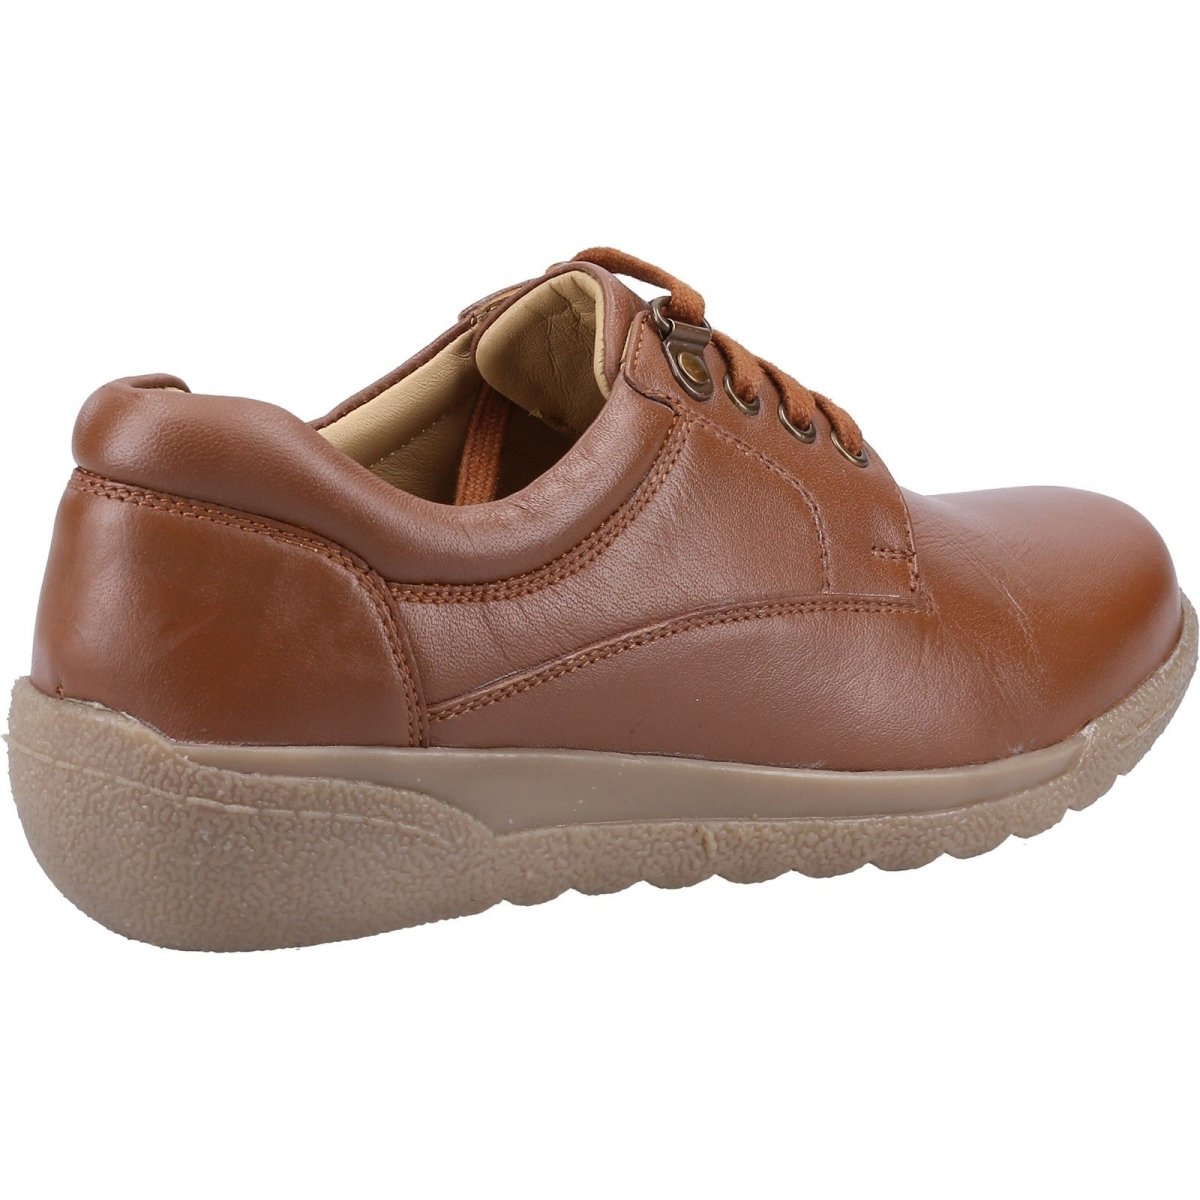 Fleet & Foster Cathy Ladies Leather Waterproof Shoes - Shoe Store Direct